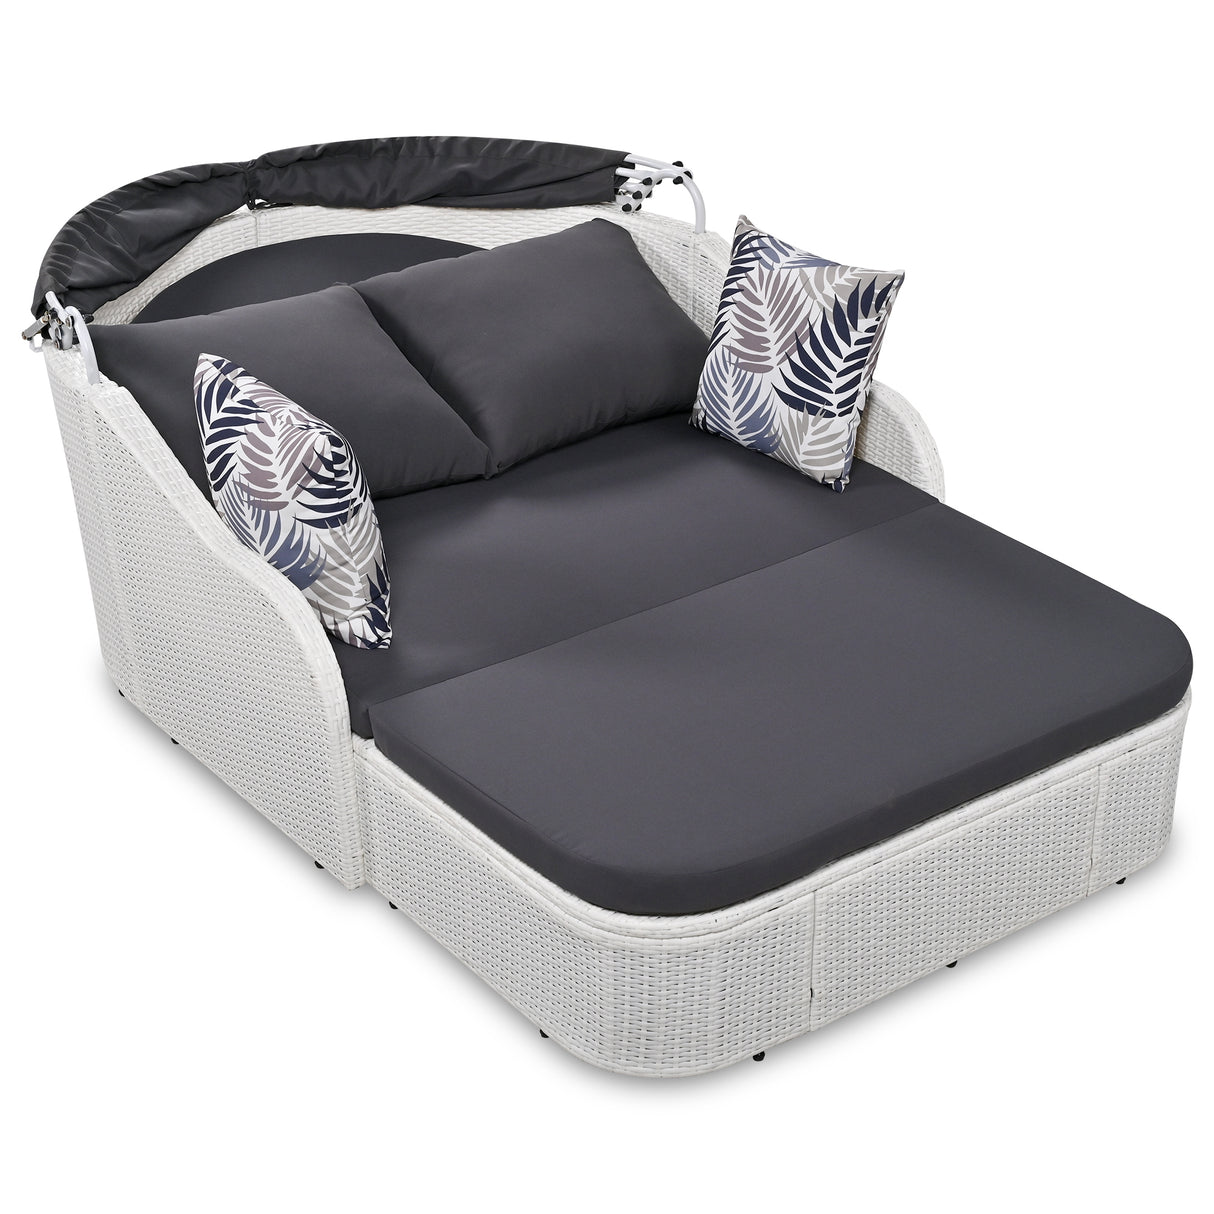 GO 79.9" Outdoor Sunbed with Adjustable Canopy, Double lounge, PE Rattan Daybed, White Wicker, Gray Cushion